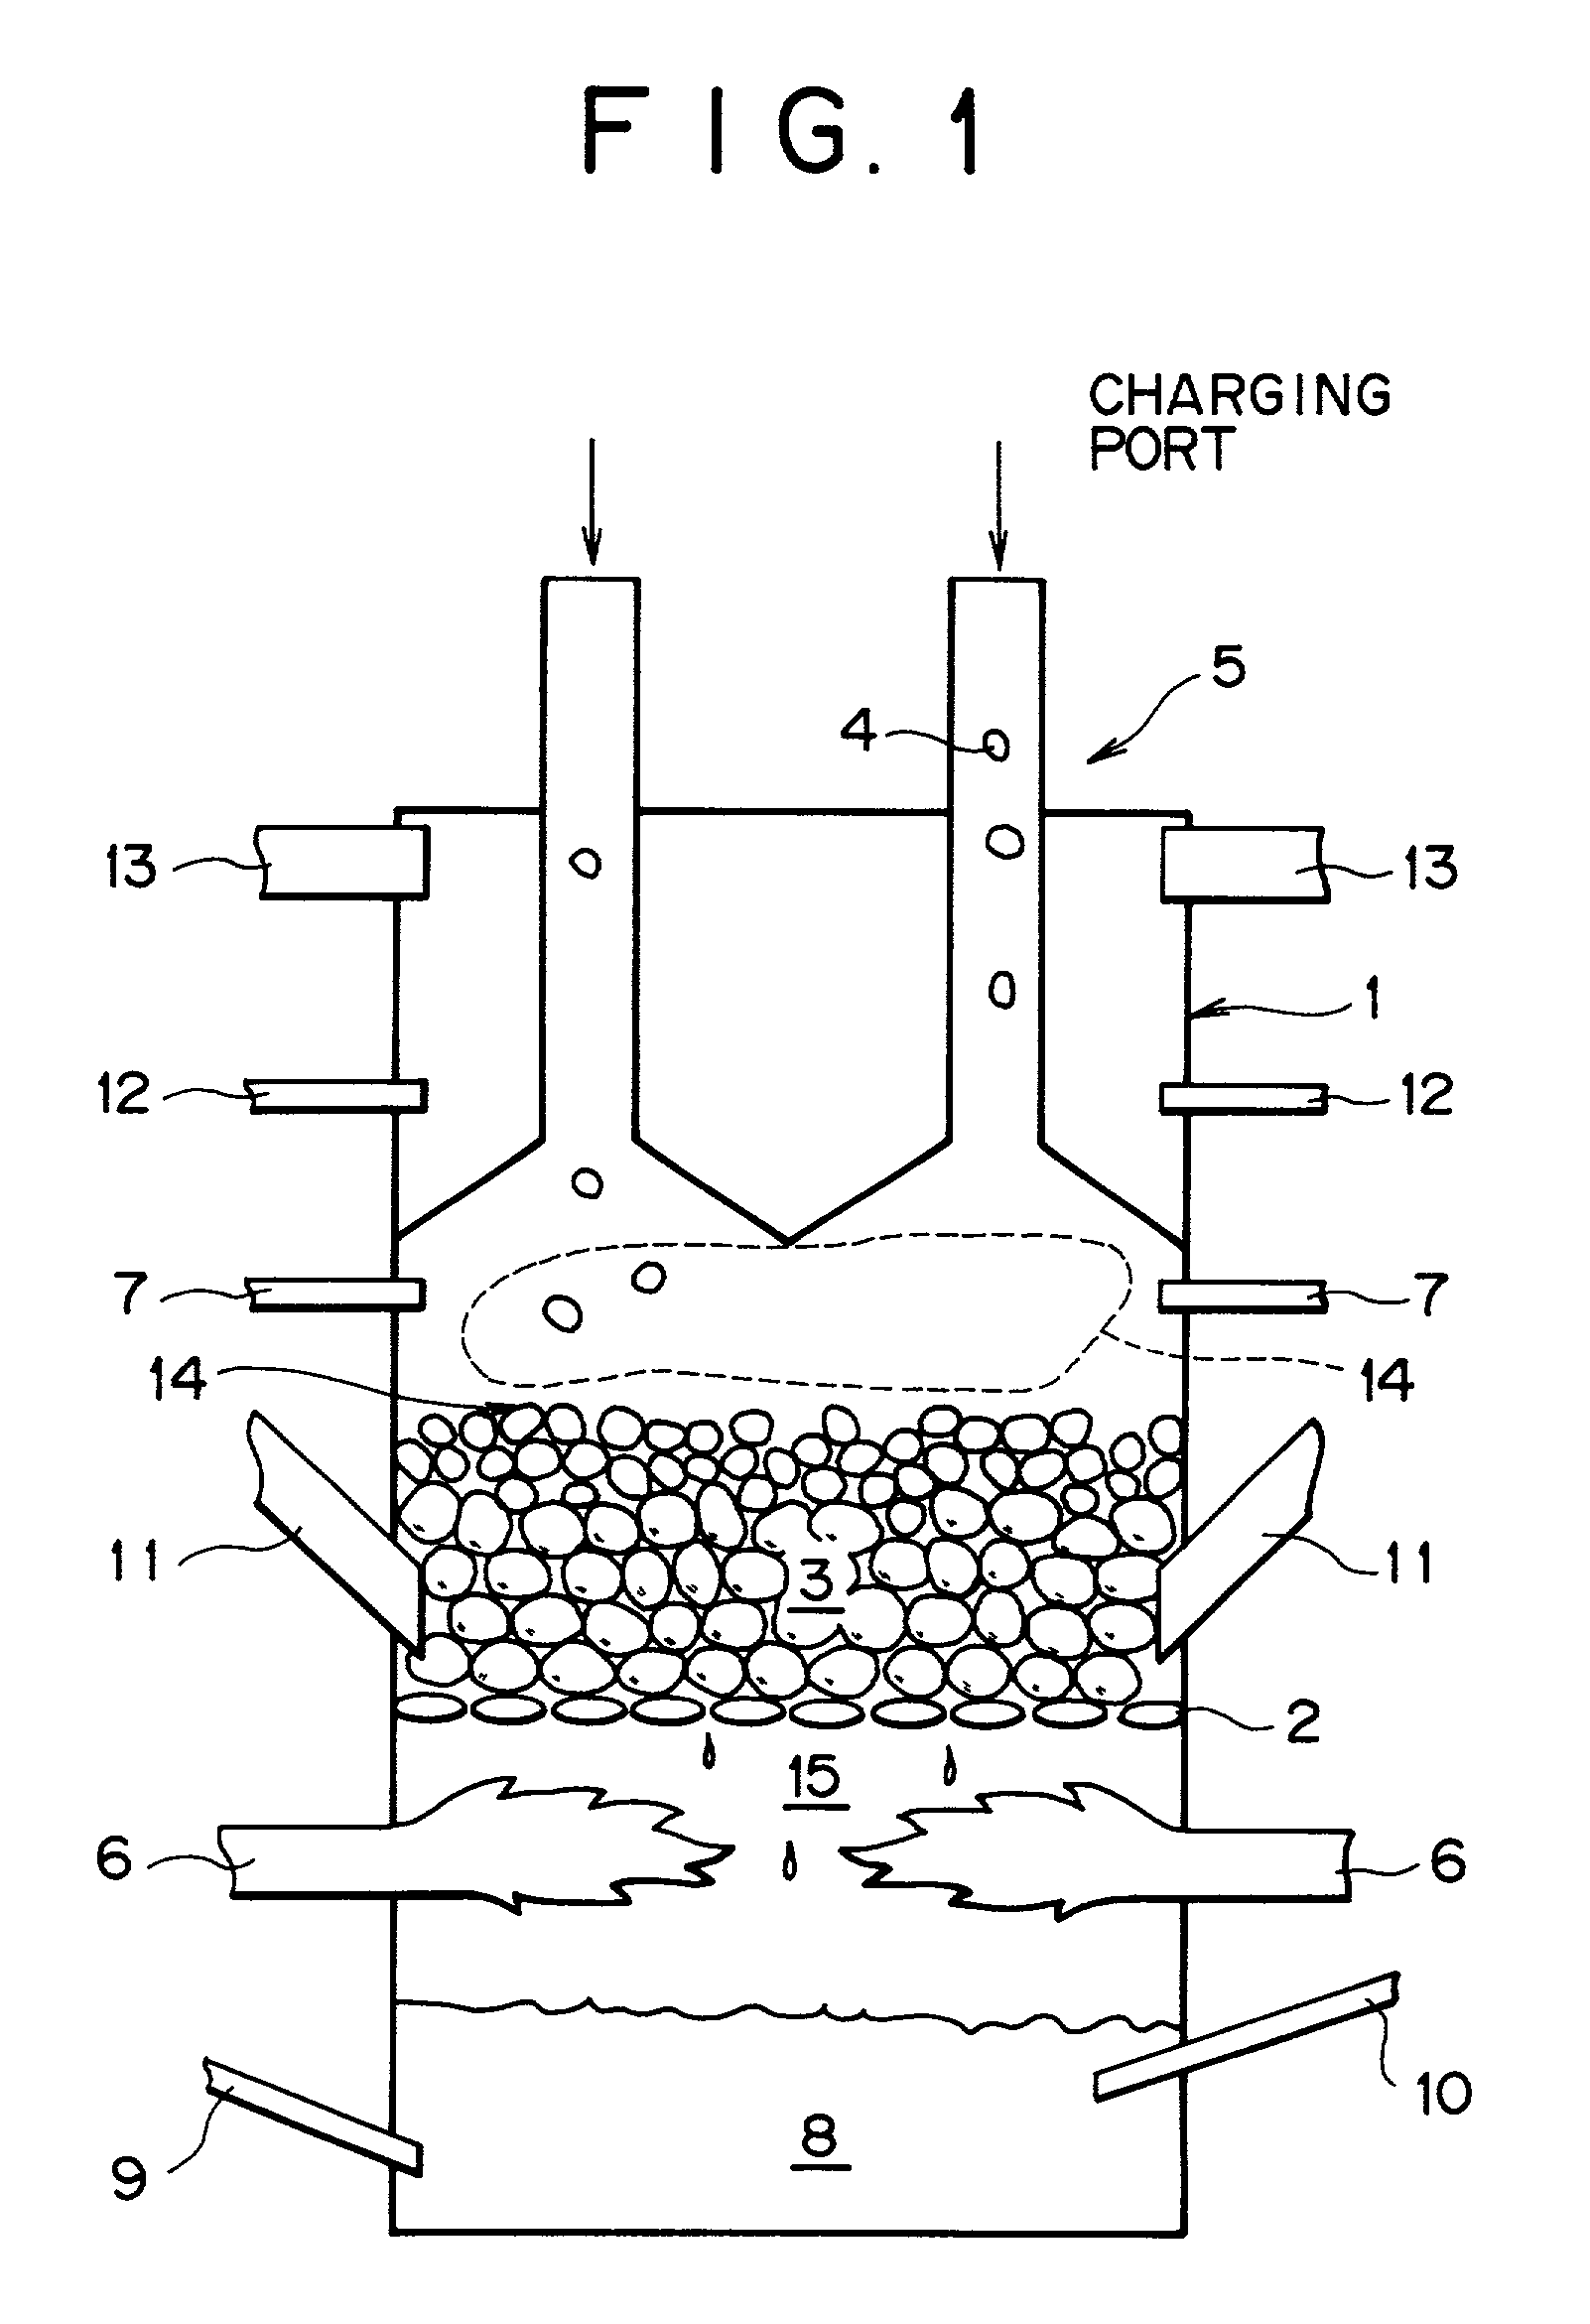 Method of and apparatus for manufacturing the metallic iron